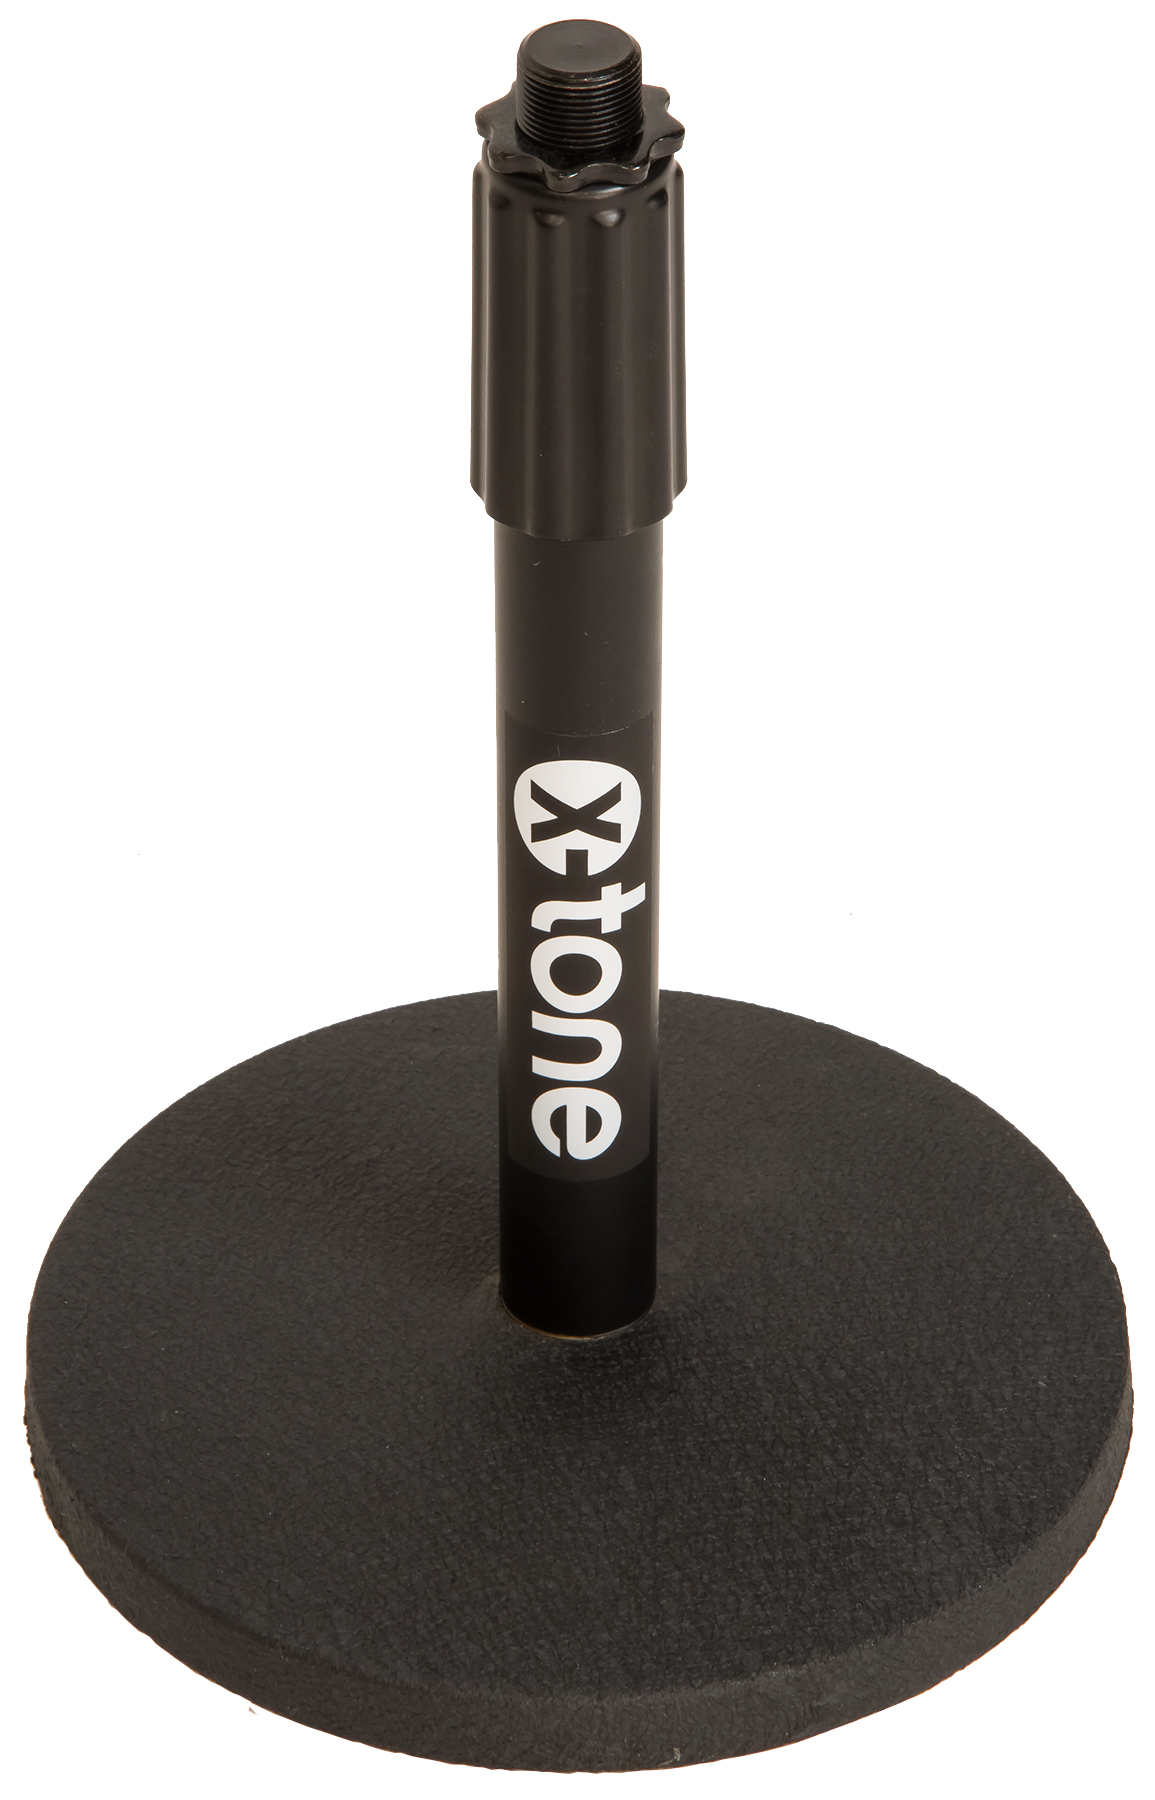 X-tone Xh 6010 Pied Micro De Table - Microphone stand - Variation 1